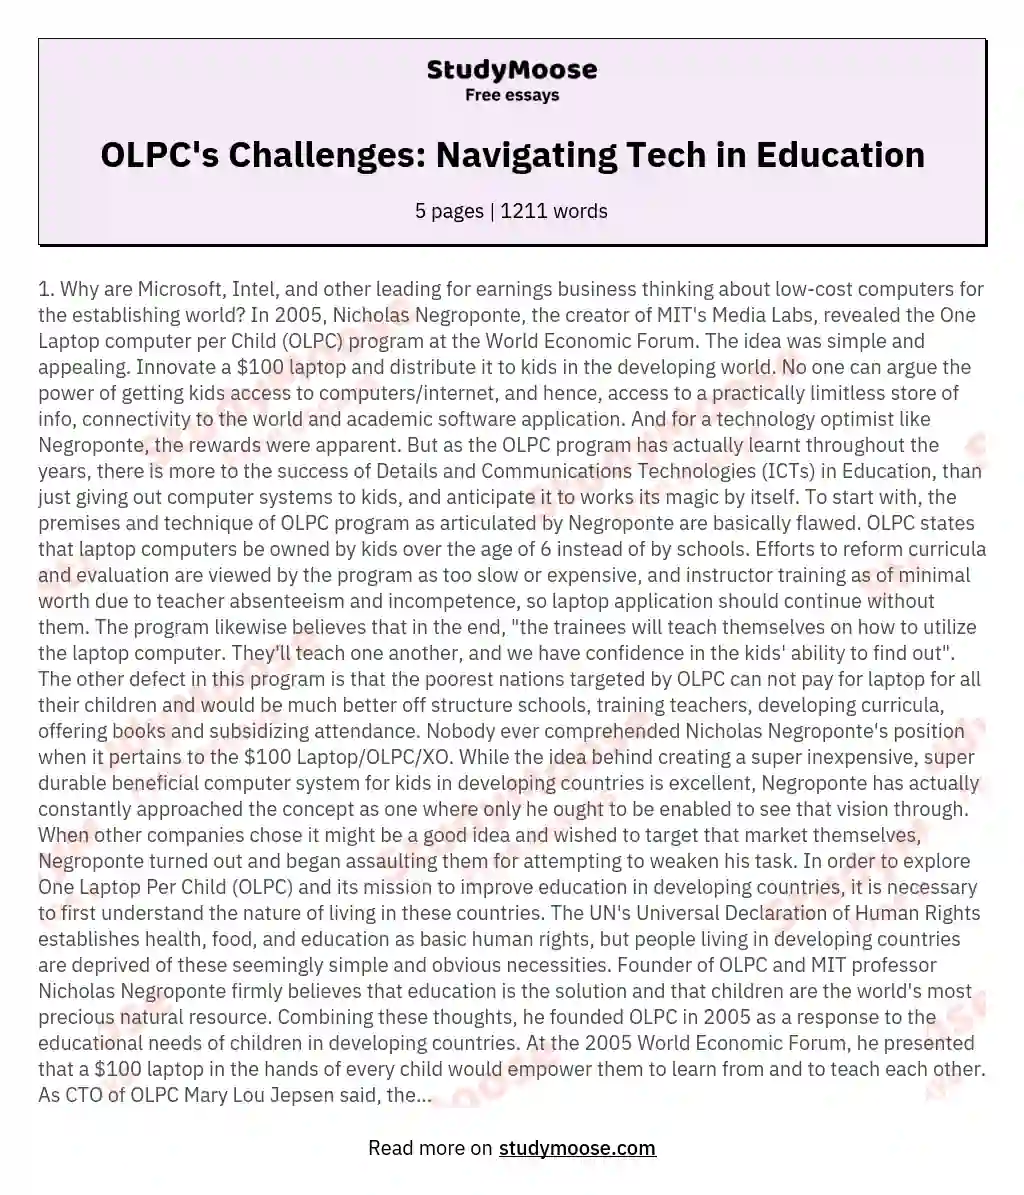 OLPC's Challenges: Navigating Tech in Education essay